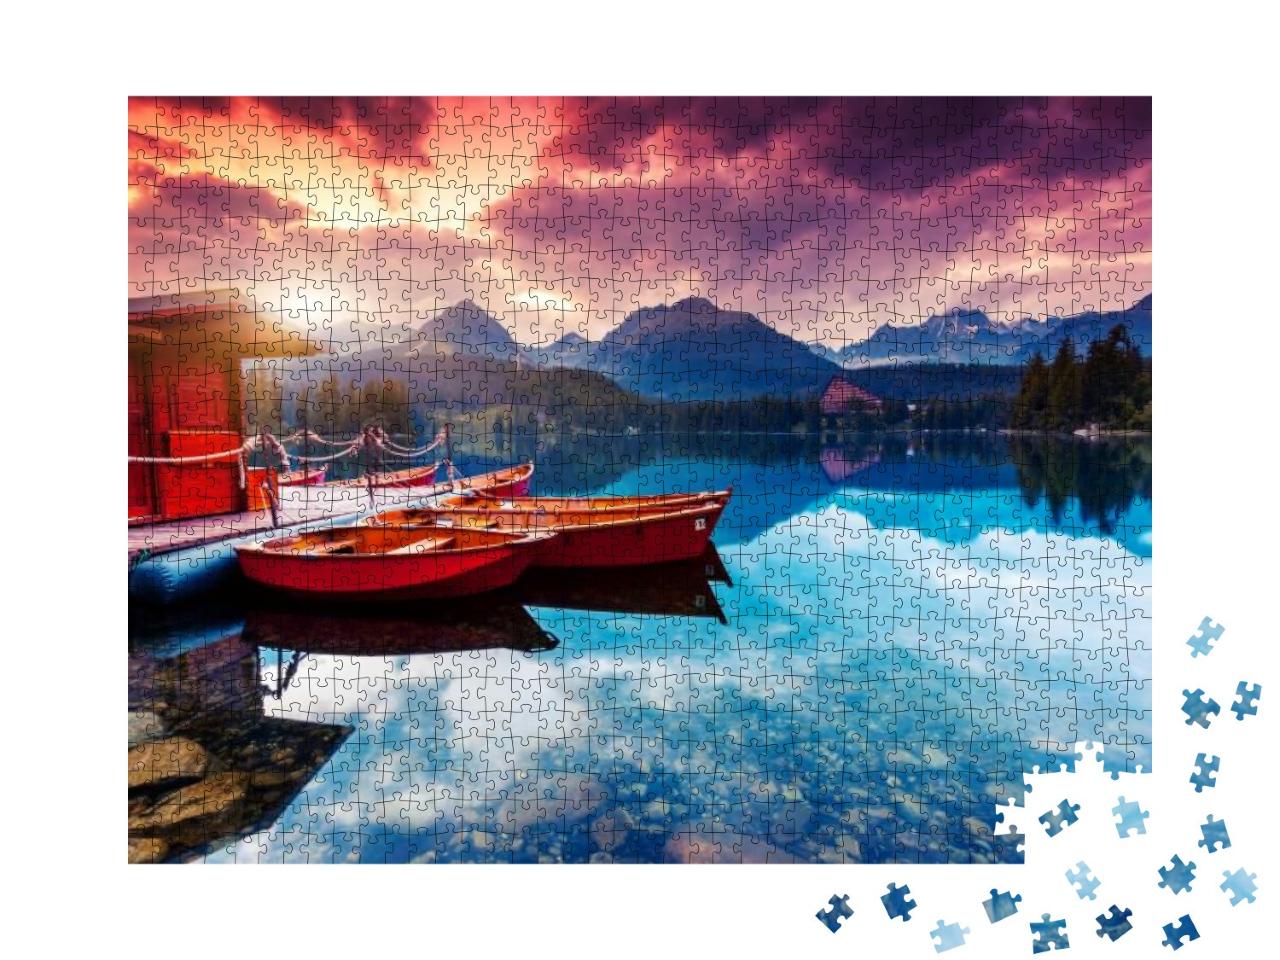 Peaceful Mountain Lake in National Park High Tatra. Drama... Jigsaw Puzzle with 1000 pieces